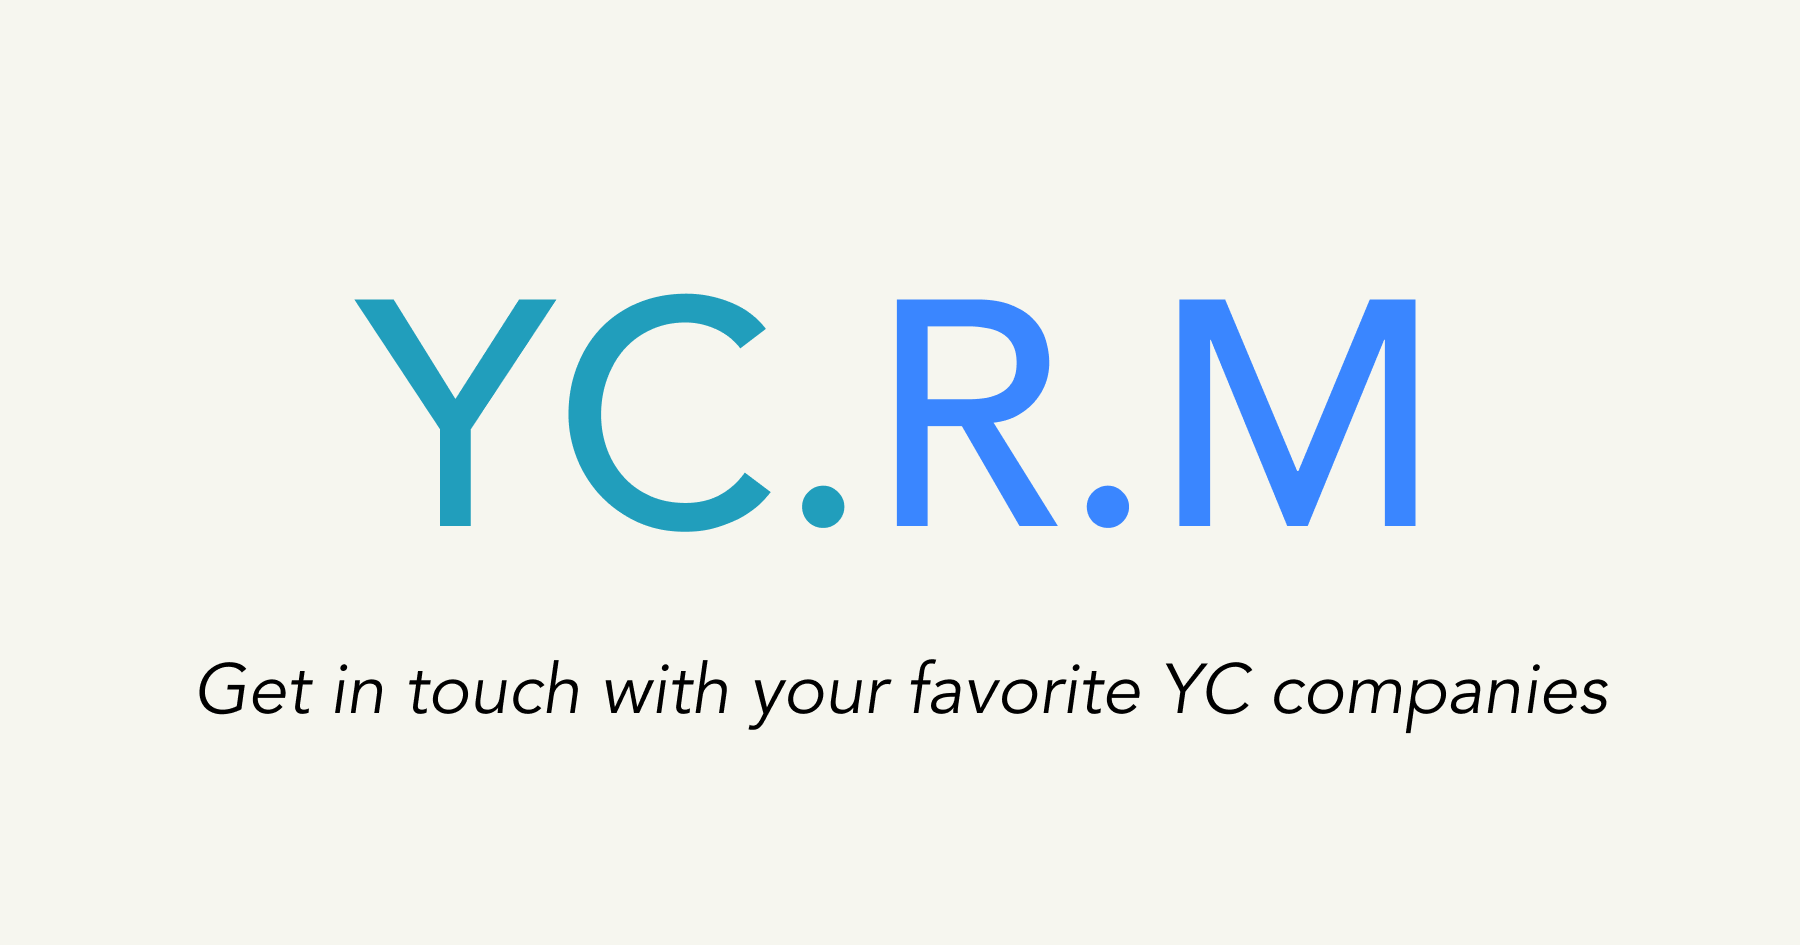 Women-founded YC companies